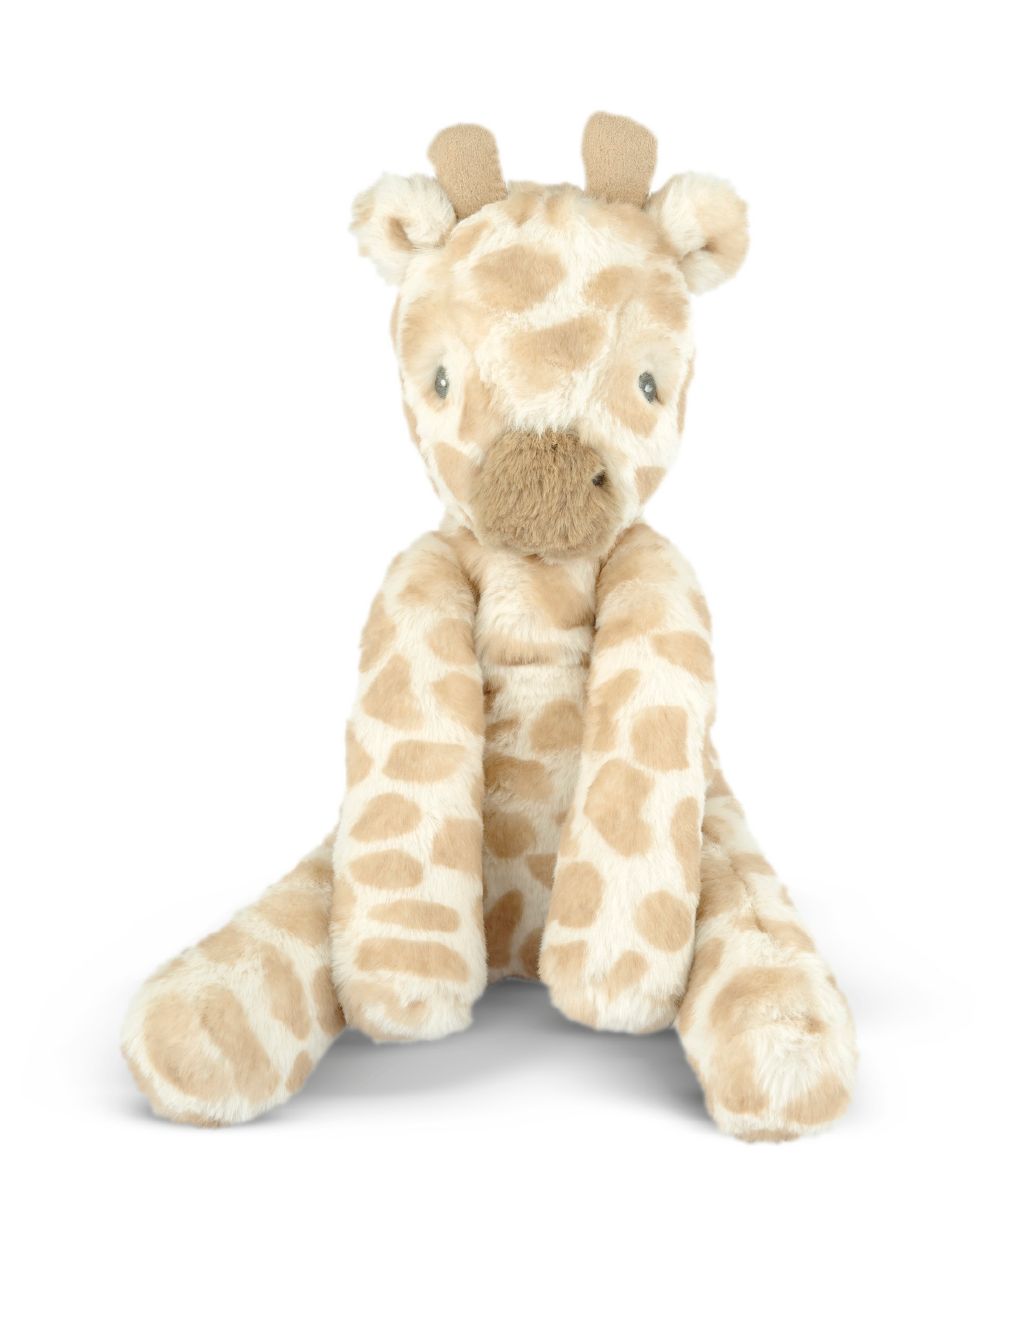 Welcome to the World Small Giraffe Soft Toy image 1